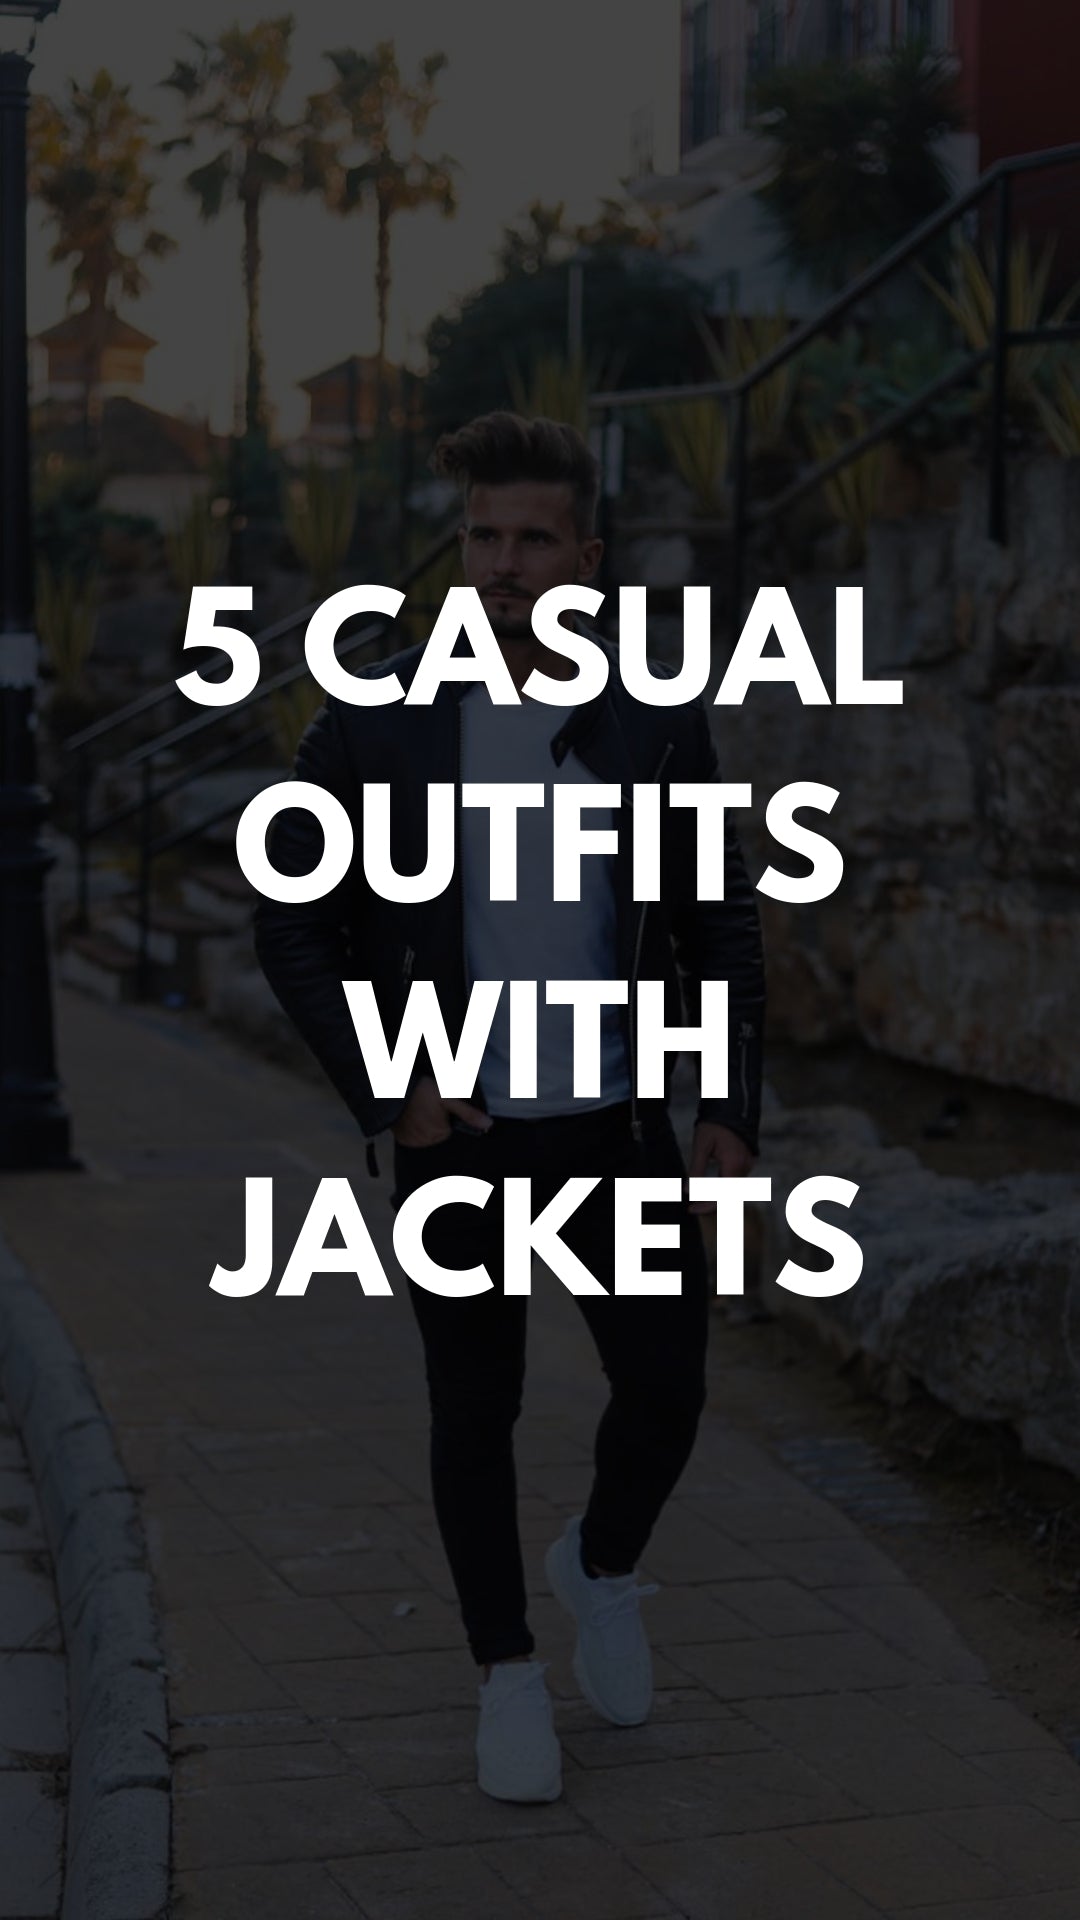 How To Wear Jackets Like A Insta Celeb – LIFESTYLE BY PS